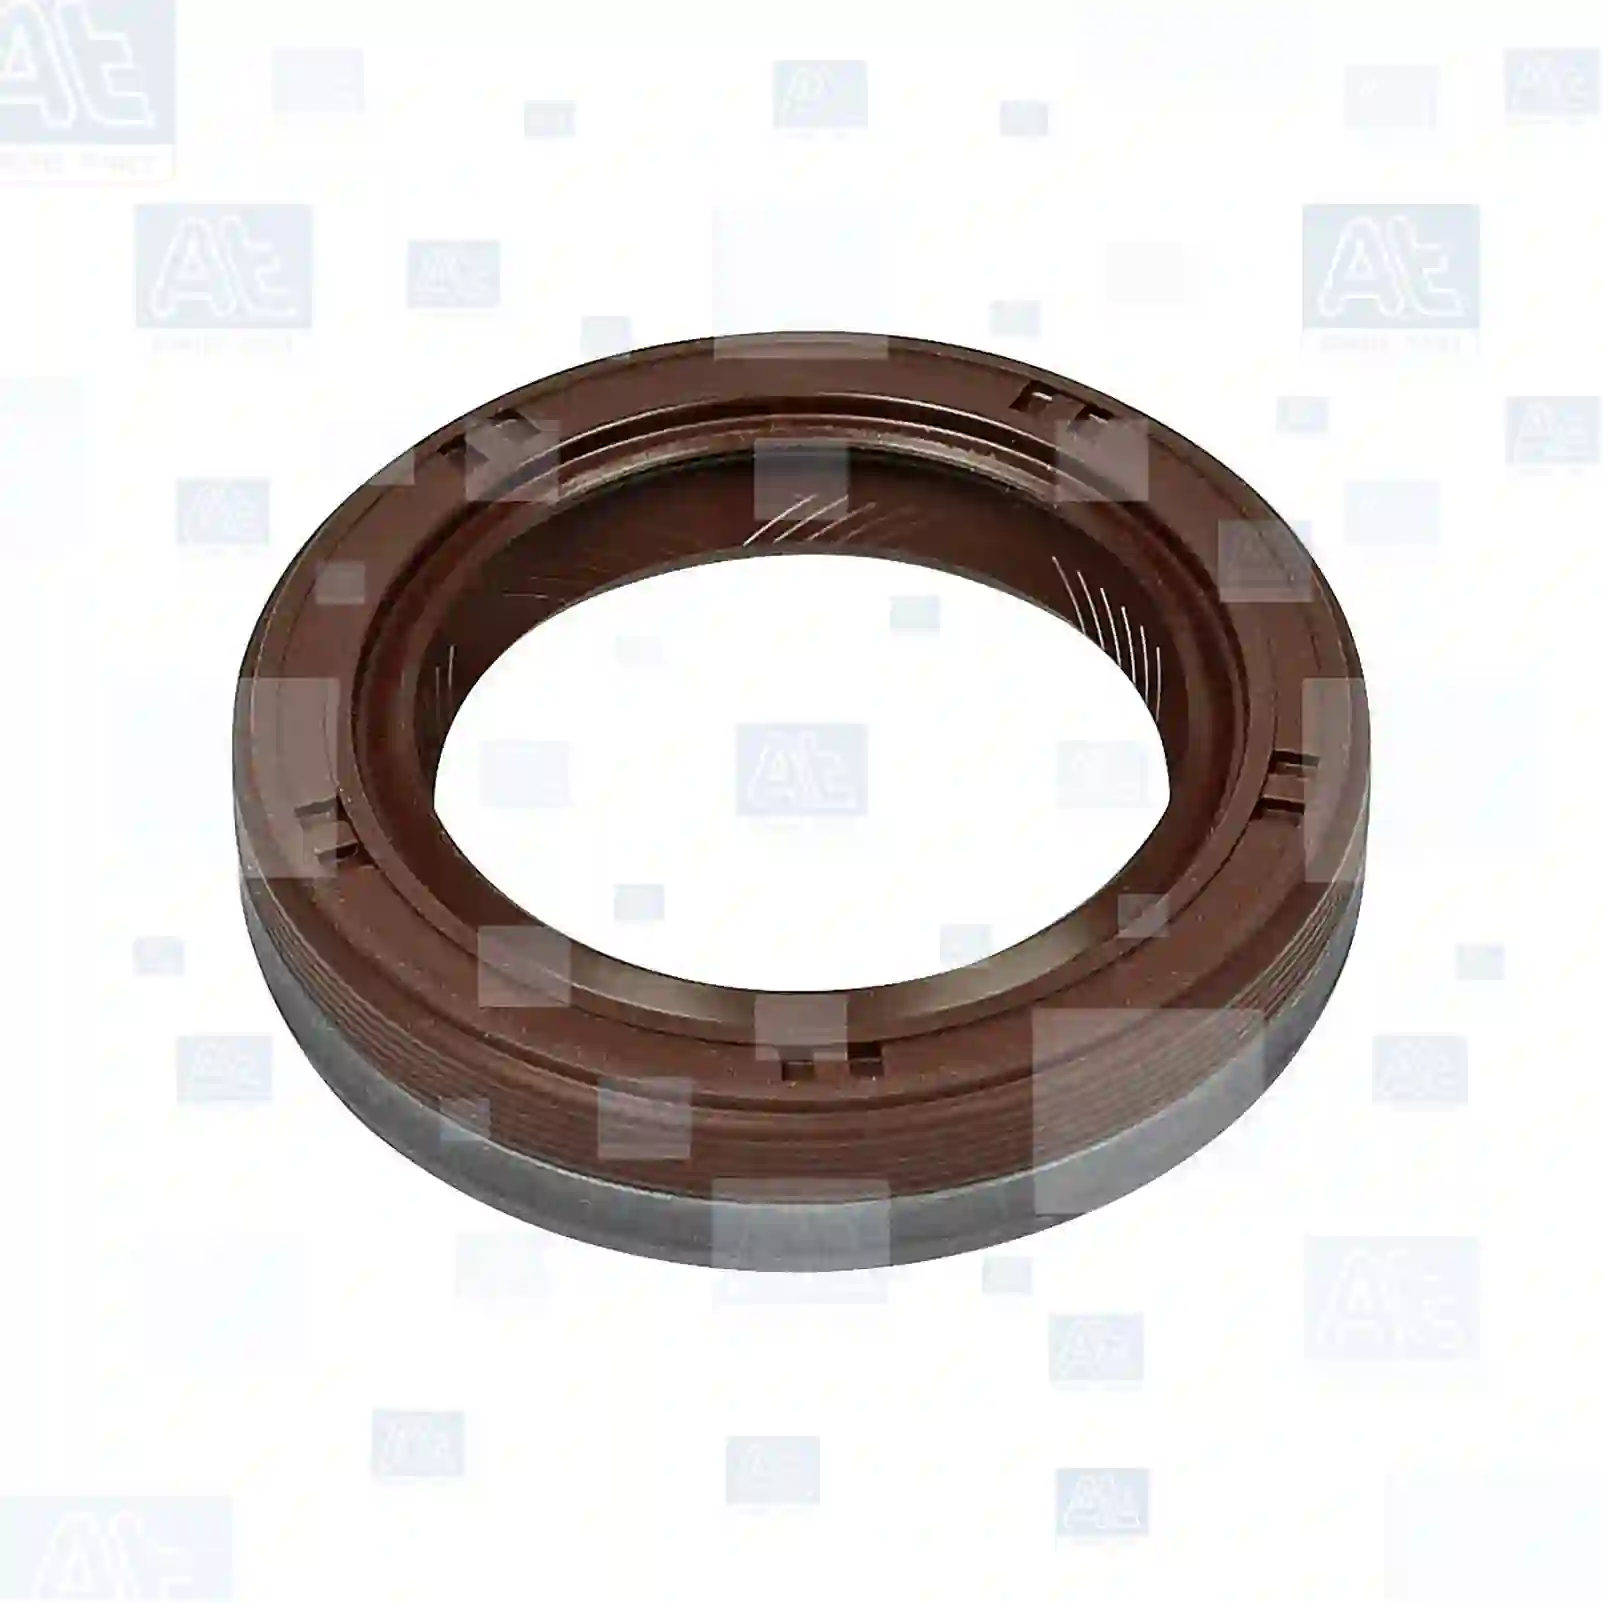 Oil seal, 77700118, 60610985, 026103085, 026103085D, 026103085E, 026103085F, 041103085, 056103085, 056103085B, 068103085A, 068103085E, 068103085G, 068103085Q, 068103085R, 1004928, 1005694, 1032523, 1669840, 068103085E, 95510418500, 026103085D, 026103085E, 026103085F, 030103085A, 056103085B, 068103085A, 068103085E, 068103085G, 068103085Q, 026103085D, 026103085E, 026103085F, 030103085A, 056103085B, 068103085A, 068103085E, 068103085G, 1257221, 6842265, 6842266, 026103085, 026103085A, 026103085D, 026103085E, 026103085F, 030103085A, 041103085, 056103085, 056103085A, 056103085B, 056103085E, 068103085, 068103085A, 068103085C, 068103085E, 068103085F, 068103085G, 068103085Q, 068103085R ||  77700118 At Spare Part | Engine, Accelerator Pedal, Camshaft, Connecting Rod, Crankcase, Crankshaft, Cylinder Head, Engine Suspension Mountings, Exhaust Manifold, Exhaust Gas Recirculation, Filter Kits, Flywheel Housing, General Overhaul Kits, Engine, Intake Manifold, Oil Cleaner, Oil Cooler, Oil Filter, Oil Pump, Oil Sump, Piston & Liner, Sensor & Switch, Timing Case, Turbocharger, Cooling System, Belt Tensioner, Coolant Filter, Coolant Pipe, Corrosion Prevention Agent, Drive, Expansion Tank, Fan, Intercooler, Monitors & Gauges, Radiator, Thermostat, V-Belt / Timing belt, Water Pump, Fuel System, Electronical Injector Unit, Feed Pump, Fuel Filter, cpl., Fuel Gauge Sender,  Fuel Line, Fuel Pump, Fuel Tank, Injection Line Kit, Injection Pump, Exhaust System, Clutch & Pedal, Gearbox, Propeller Shaft, Axles, Brake System, Hubs & Wheels, Suspension, Leaf Spring, Universal Parts / Accessories, Steering, Electrical System, Cabin Oil seal, 77700118, 60610985, 026103085, 026103085D, 026103085E, 026103085F, 041103085, 056103085, 056103085B, 068103085A, 068103085E, 068103085G, 068103085Q, 068103085R, 1004928, 1005694, 1032523, 1669840, 068103085E, 95510418500, 026103085D, 026103085E, 026103085F, 030103085A, 056103085B, 068103085A, 068103085E, 068103085G, 068103085Q, 026103085D, 026103085E, 026103085F, 030103085A, 056103085B, 068103085A, 068103085E, 068103085G, 1257221, 6842265, 6842266, 026103085, 026103085A, 026103085D, 026103085E, 026103085F, 030103085A, 041103085, 056103085, 056103085A, 056103085B, 056103085E, 068103085, 068103085A, 068103085C, 068103085E, 068103085F, 068103085G, 068103085Q, 068103085R ||  77700118 At Spare Part | Engine, Accelerator Pedal, Camshaft, Connecting Rod, Crankcase, Crankshaft, Cylinder Head, Engine Suspension Mountings, Exhaust Manifold, Exhaust Gas Recirculation, Filter Kits, Flywheel Housing, General Overhaul Kits, Engine, Intake Manifold, Oil Cleaner, Oil Cooler, Oil Filter, Oil Pump, Oil Sump, Piston & Liner, Sensor & Switch, Timing Case, Turbocharger, Cooling System, Belt Tensioner, Coolant Filter, Coolant Pipe, Corrosion Prevention Agent, Drive, Expansion Tank, Fan, Intercooler, Monitors & Gauges, Radiator, Thermostat, V-Belt / Timing belt, Water Pump, Fuel System, Electronical Injector Unit, Feed Pump, Fuel Filter, cpl., Fuel Gauge Sender,  Fuel Line, Fuel Pump, Fuel Tank, Injection Line Kit, Injection Pump, Exhaust System, Clutch & Pedal, Gearbox, Propeller Shaft, Axles, Brake System, Hubs & Wheels, Suspension, Leaf Spring, Universal Parts / Accessories, Steering, Electrical System, Cabin